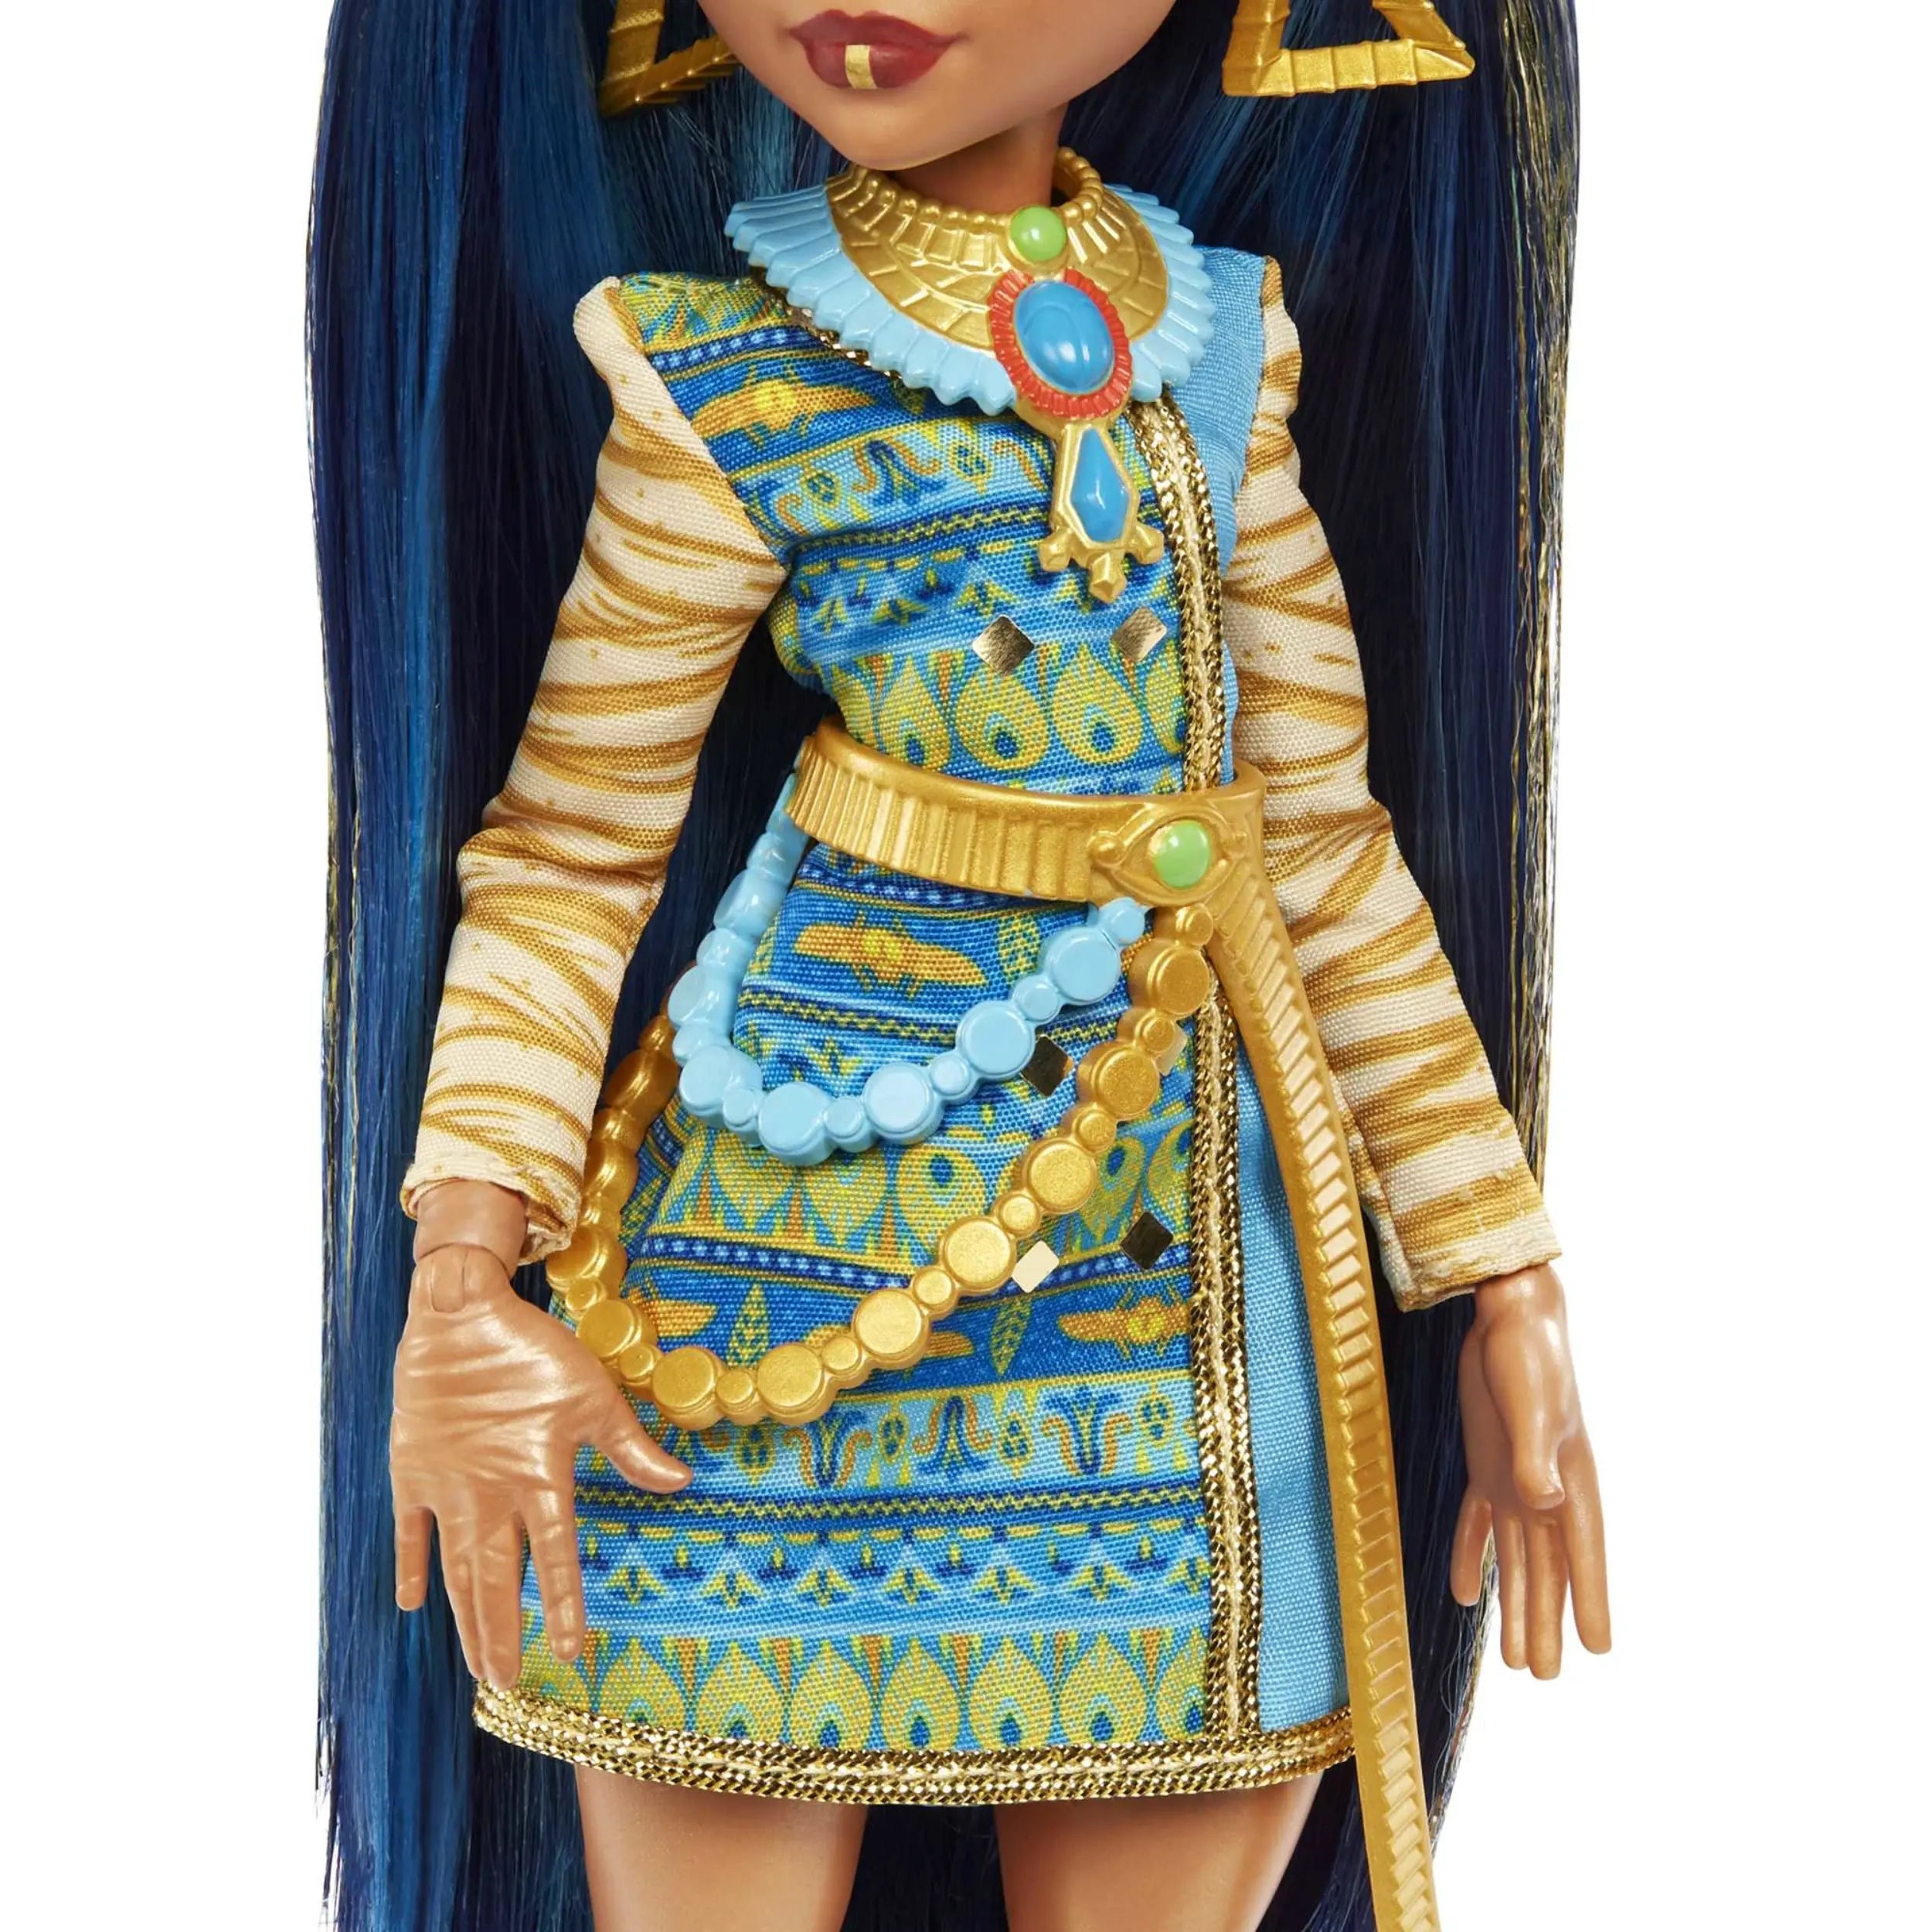 Mattel - Monster High Doll Cleo De Nile Doll With Pet And Accessories HHK54